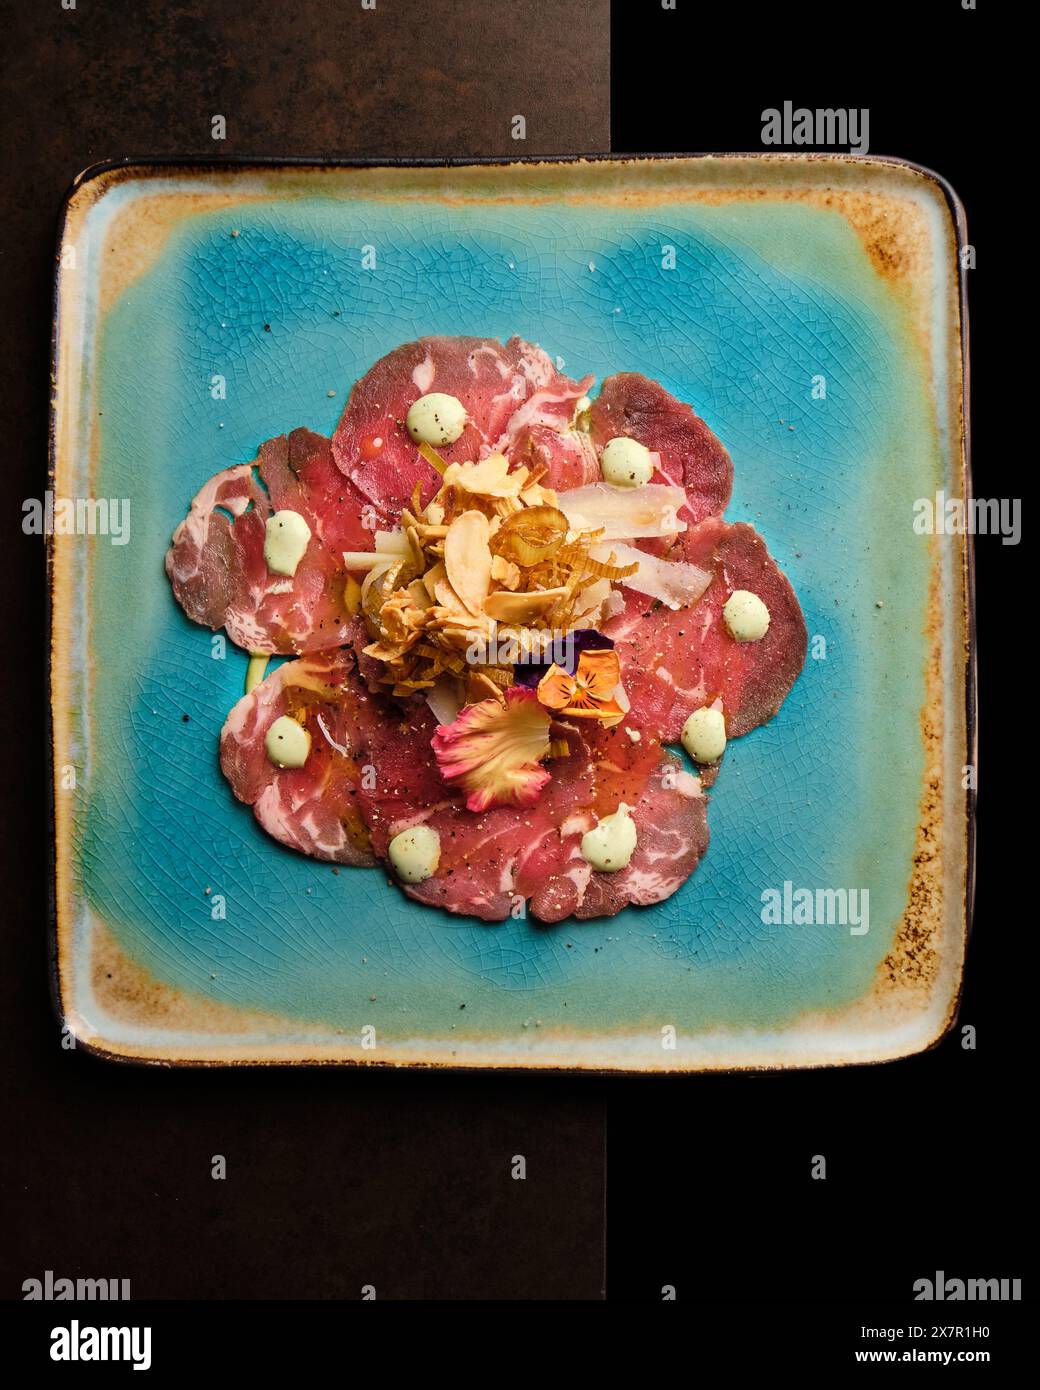 Artistic presentation of beef carpaccio adorned with dollops of sauce, edible flowers, and crispy toppings, elegantly served on a rustic blue plate ag Stock Photo